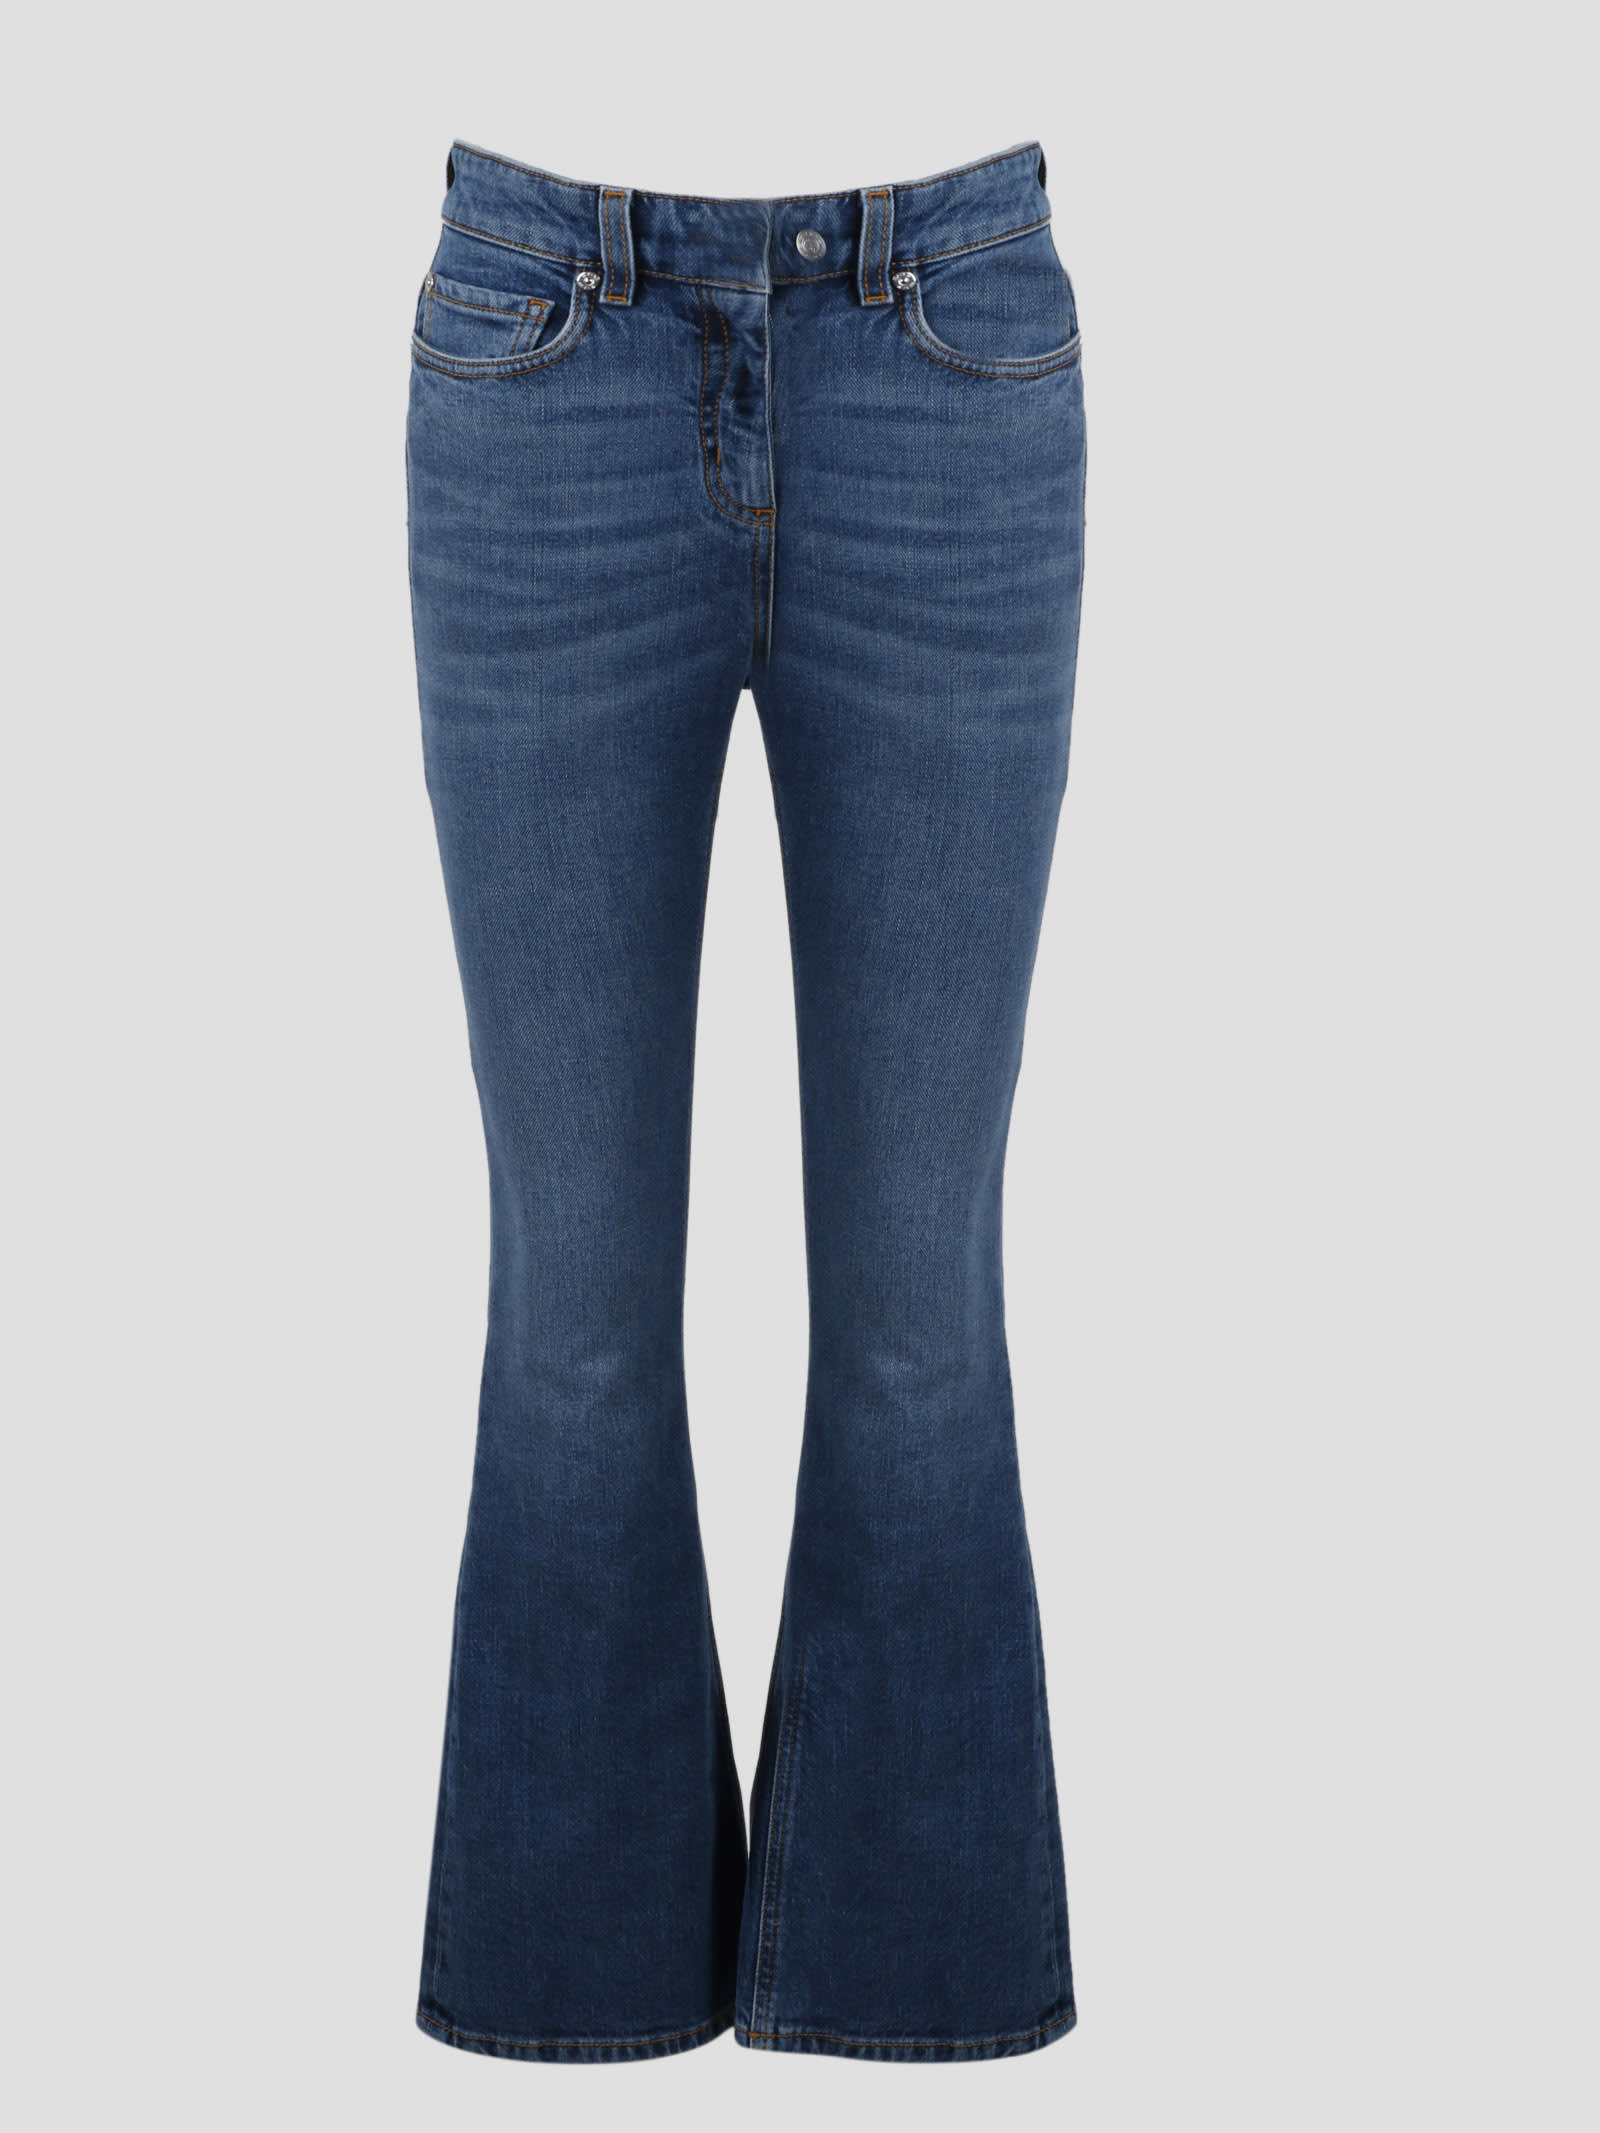 Etro Cotton Floral Embroidered Jeans in Blue